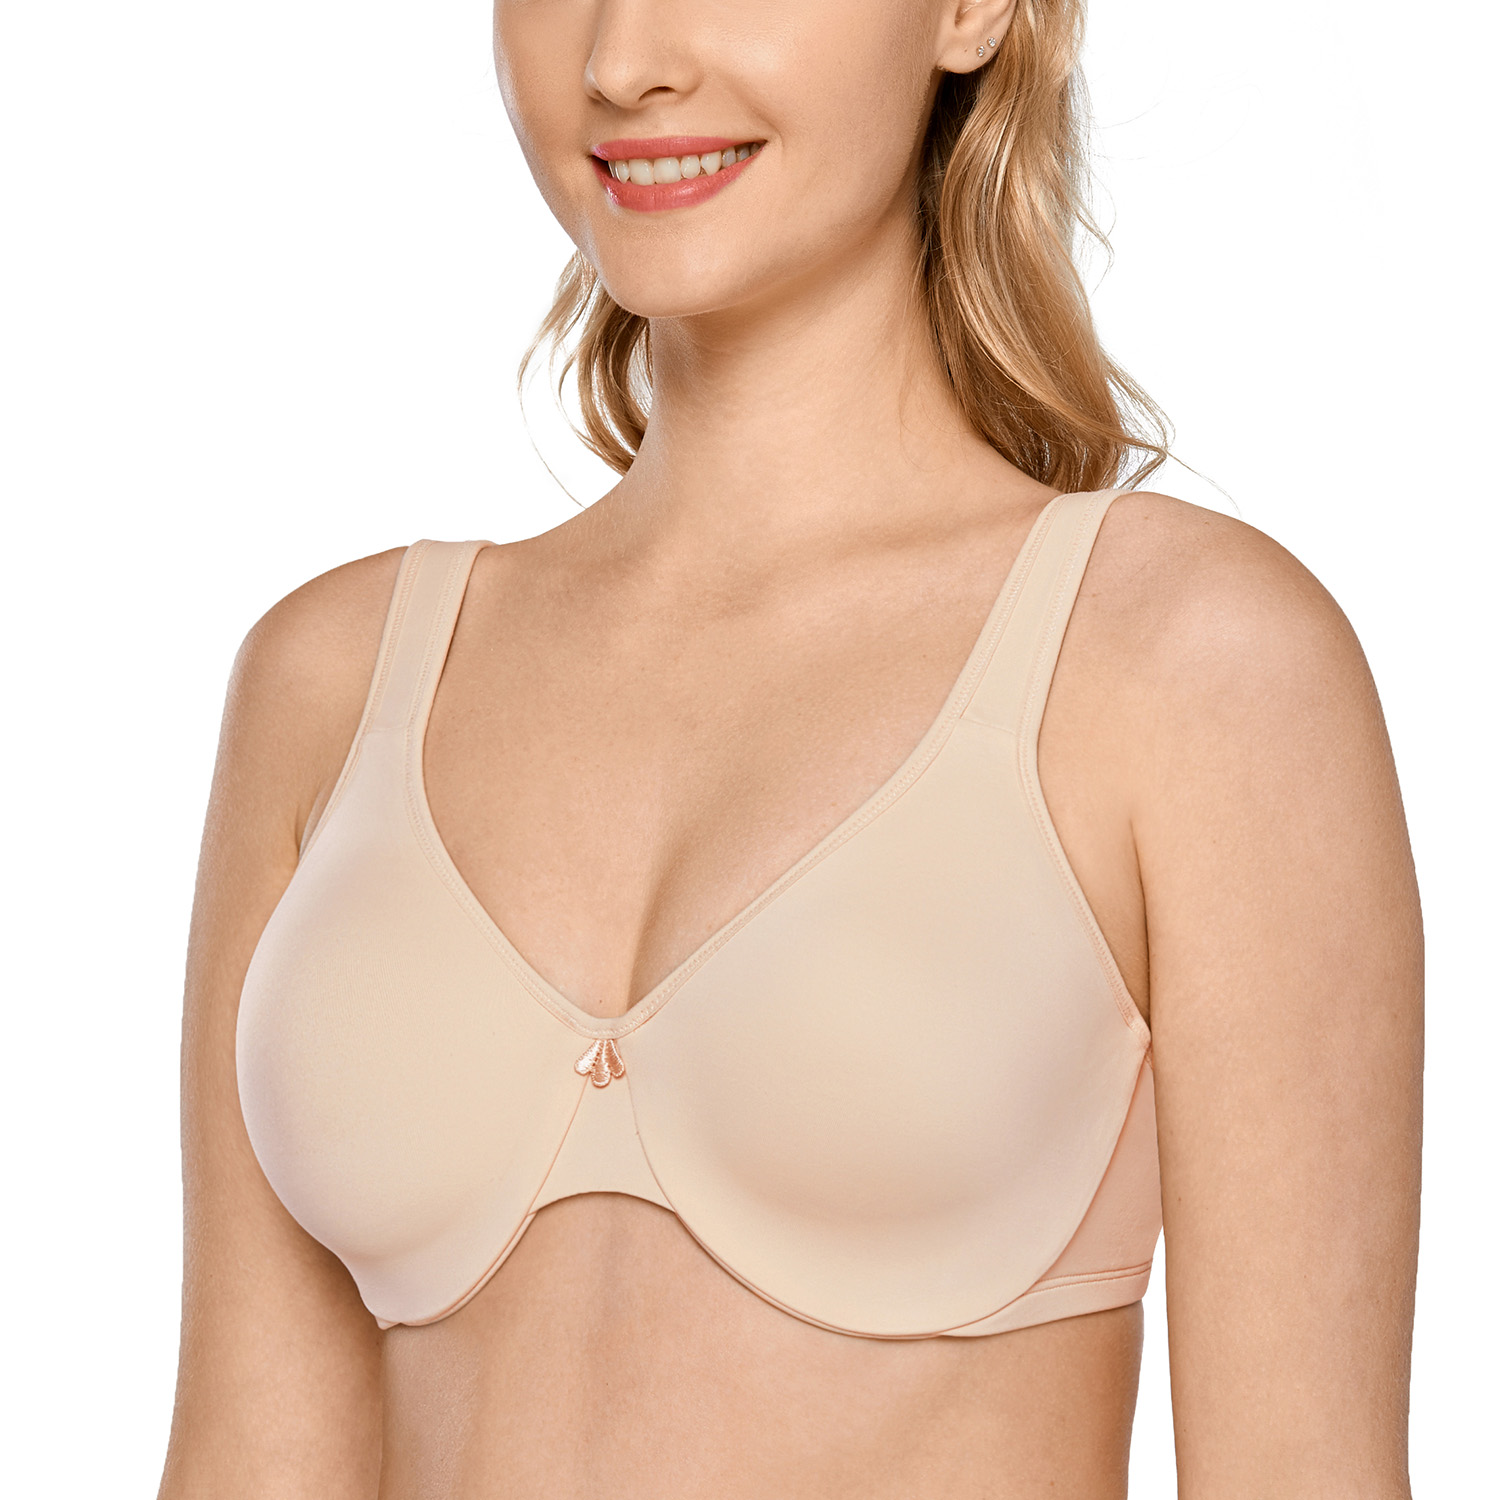 Full Cup Bra Delimira Minimiser Full Coverage Underwired Lace Not